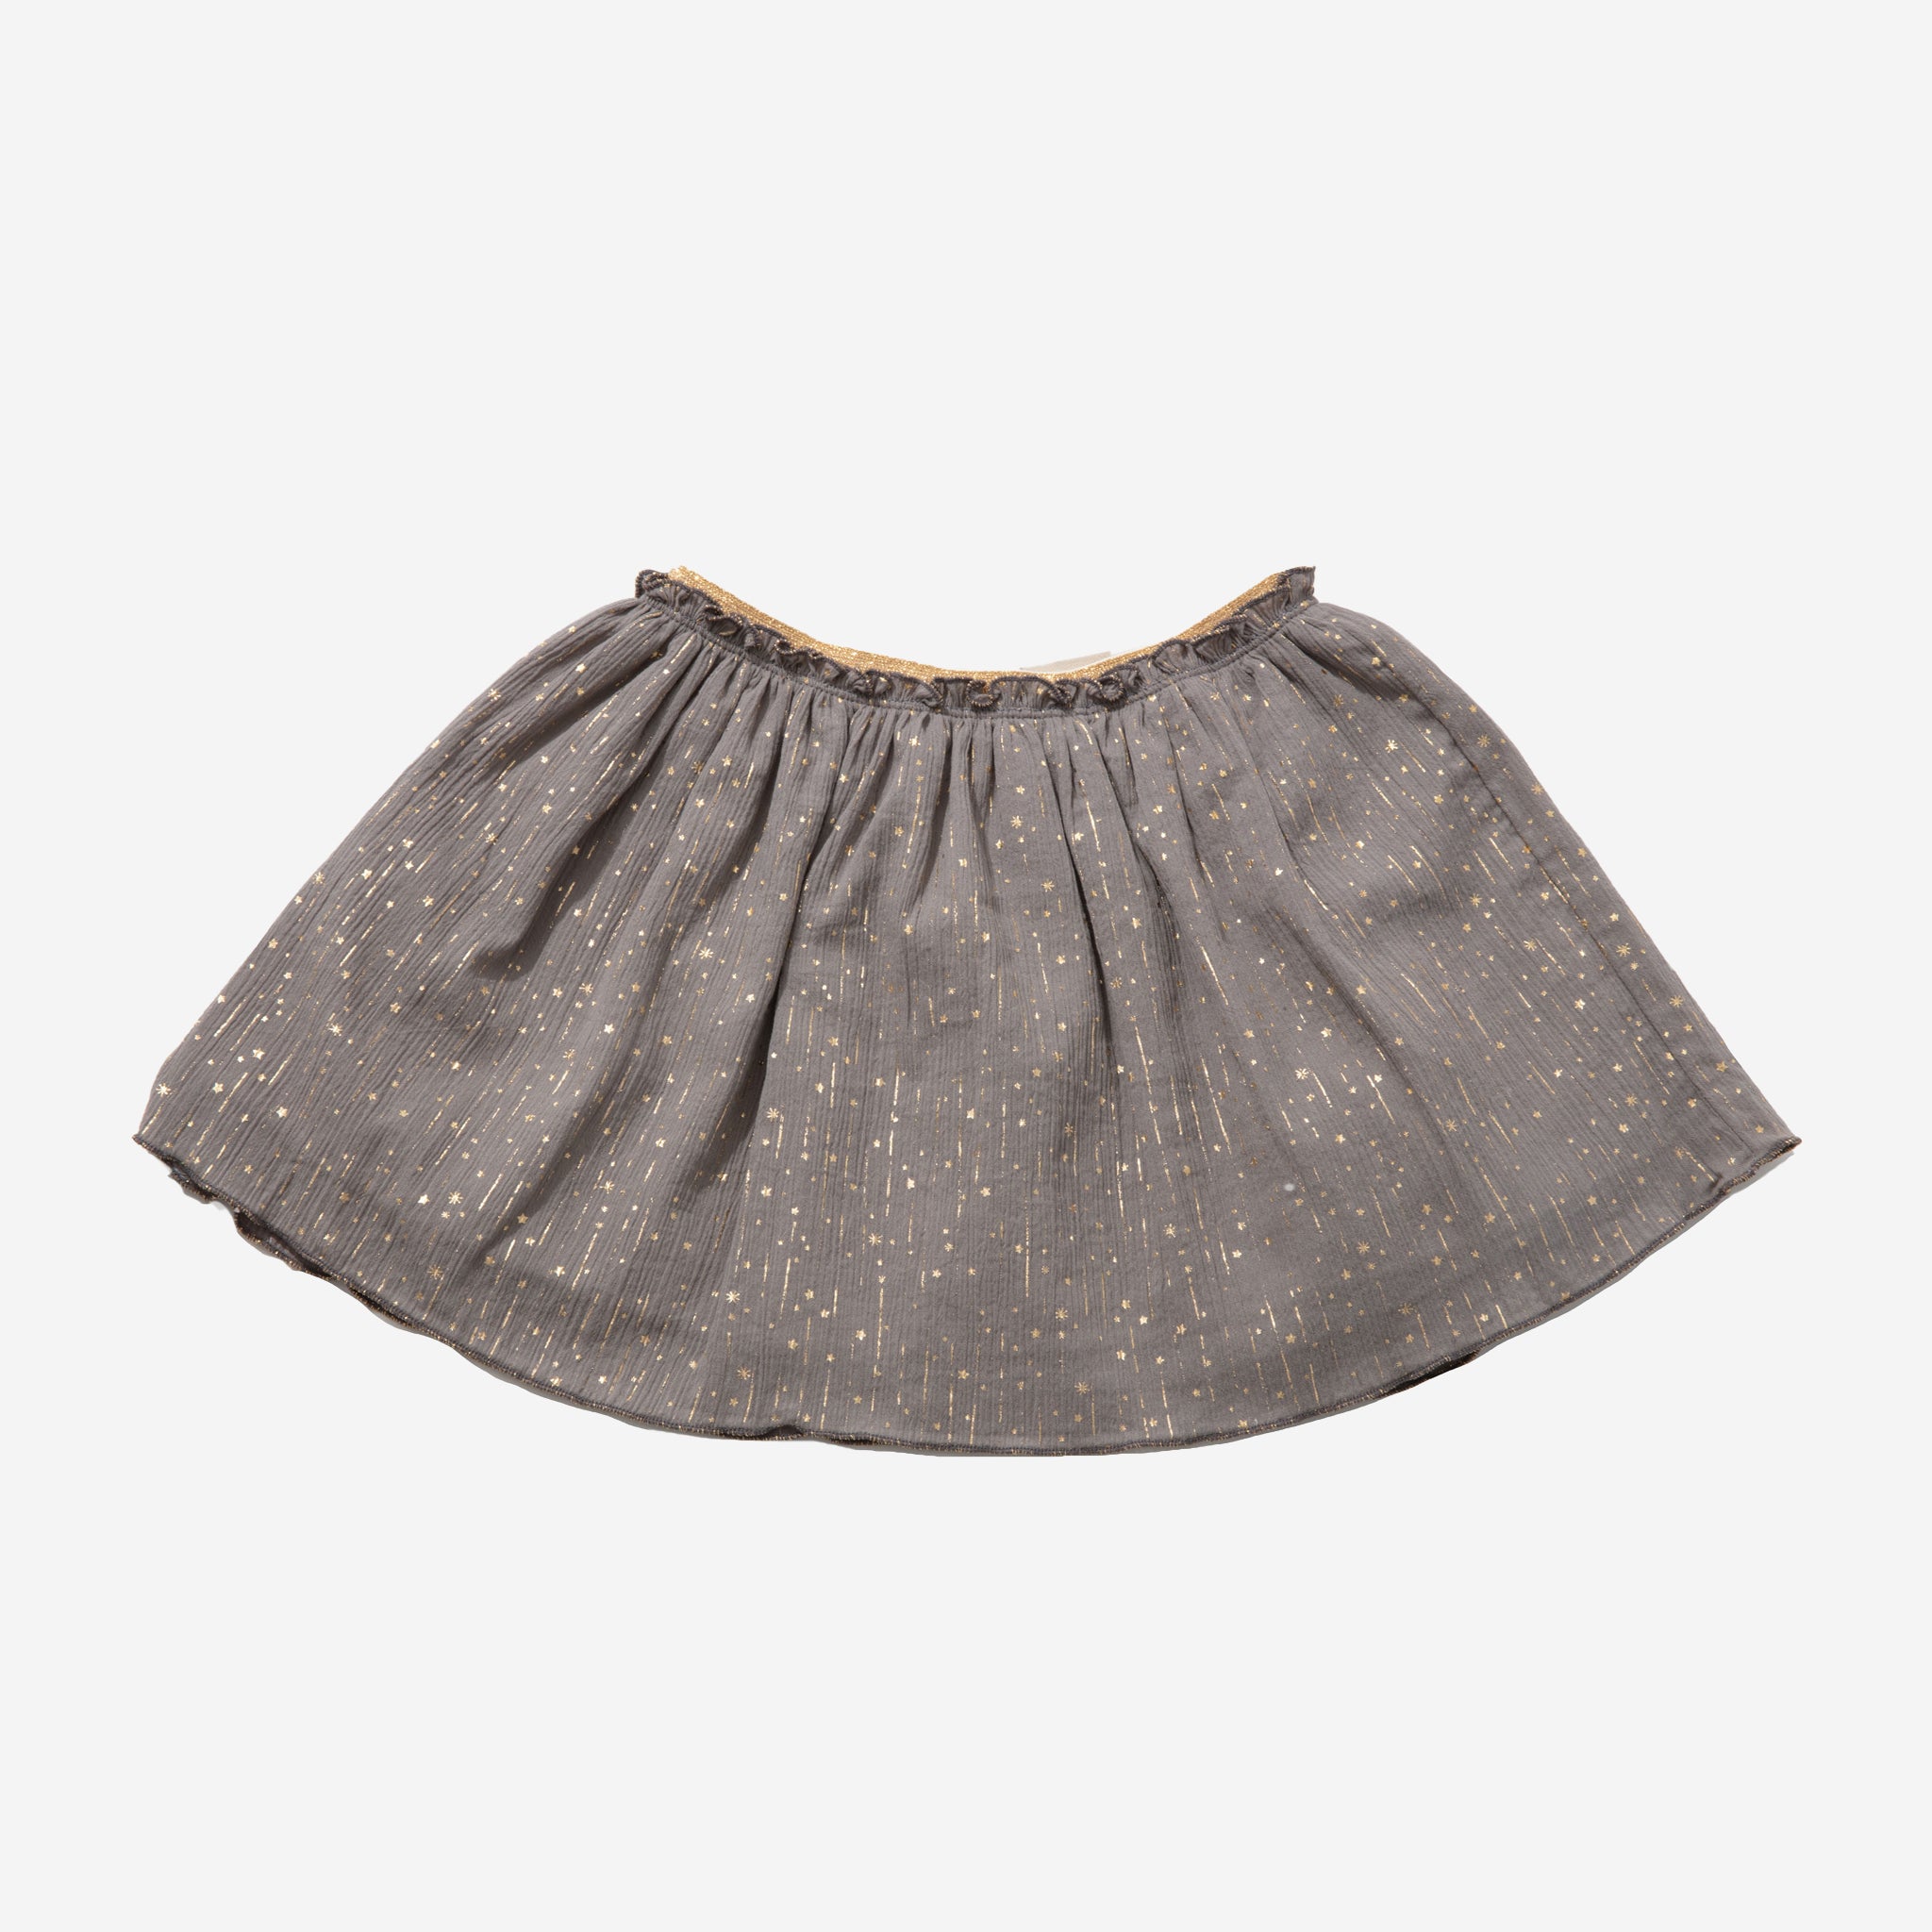 gray skirt with very tiny gold star and lines